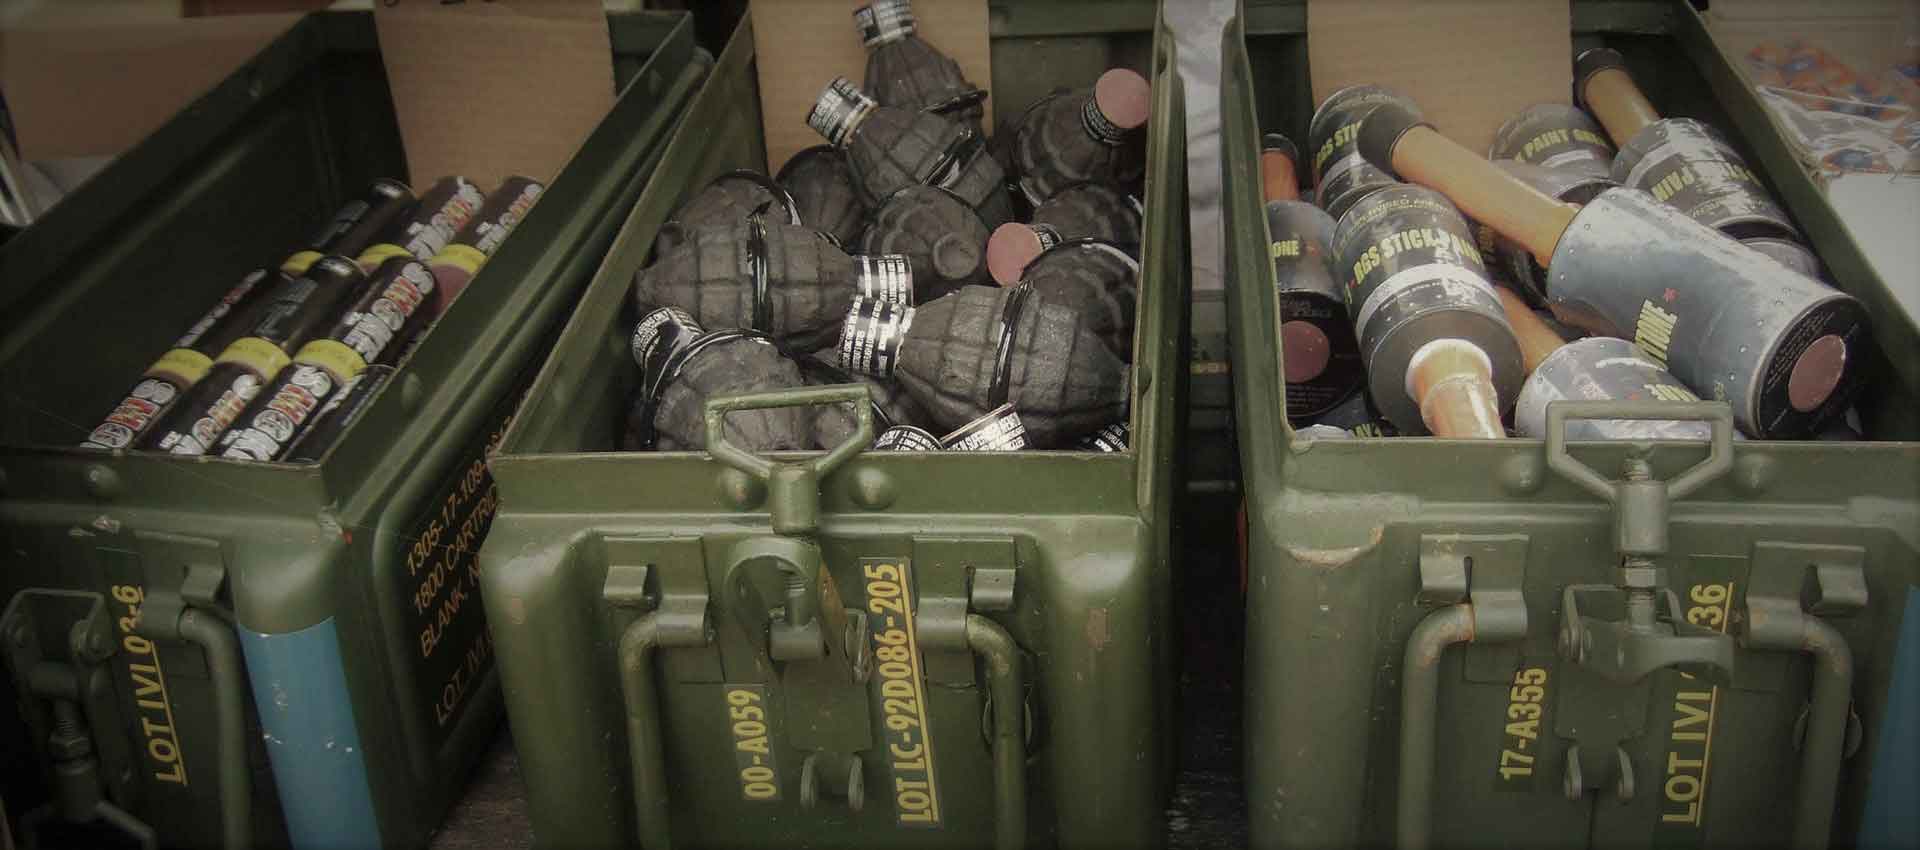 3 ammunition boxes containing paintball pyrotechincs, smoke and paint grenades